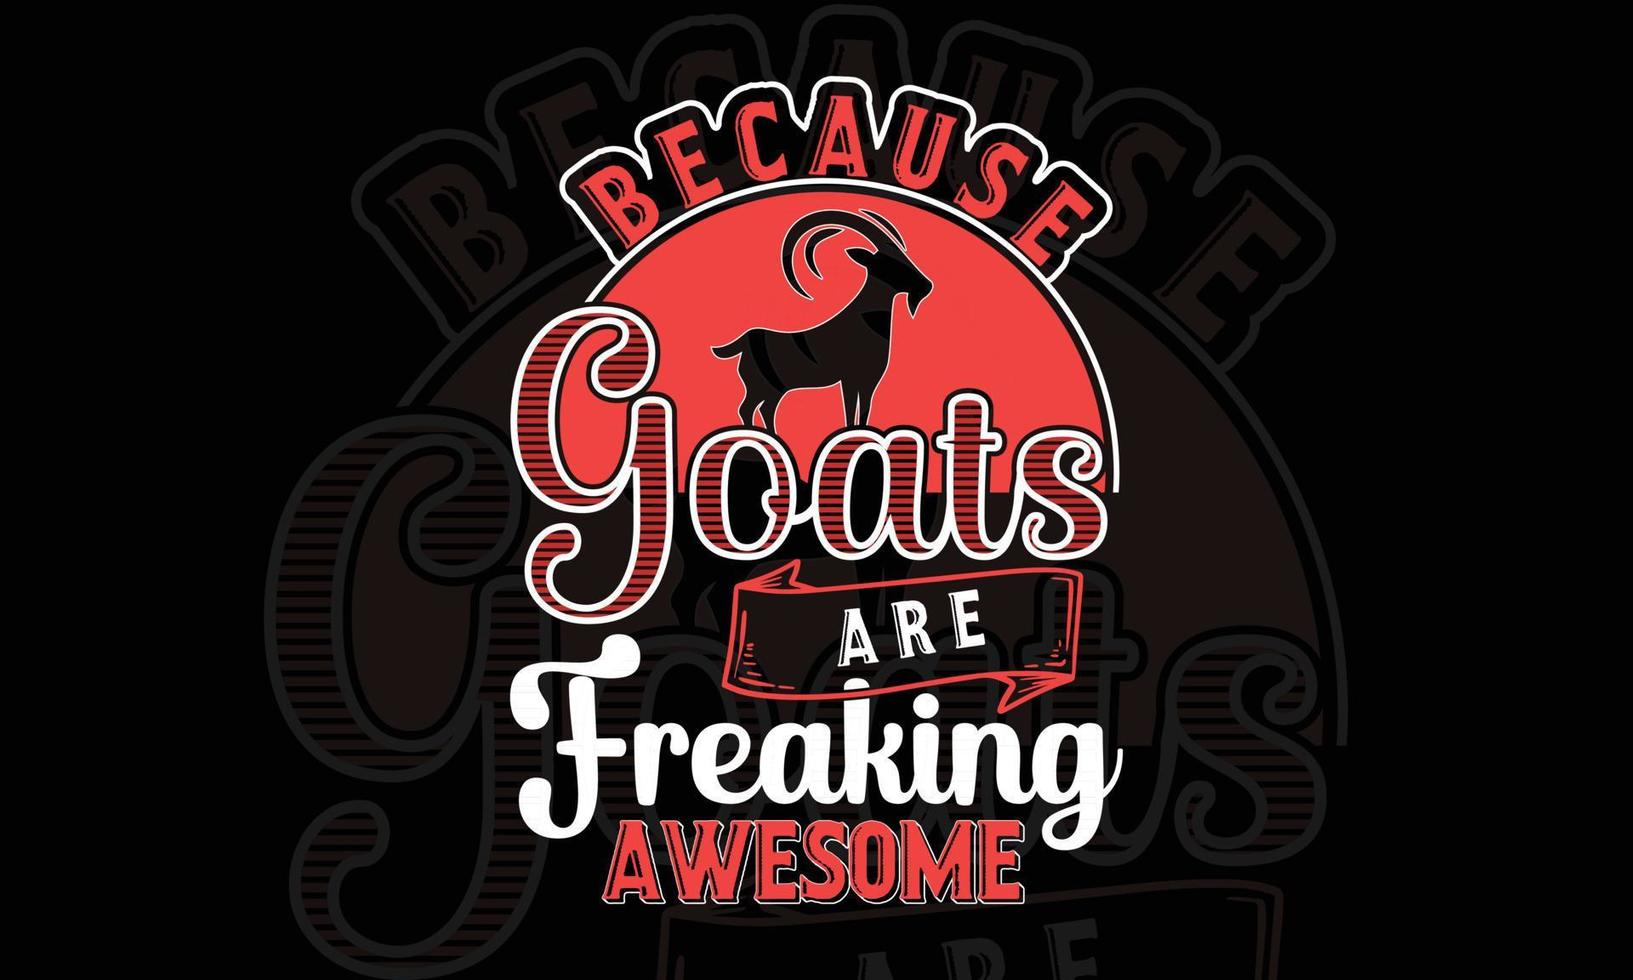 Goats typography t-shirts design vector